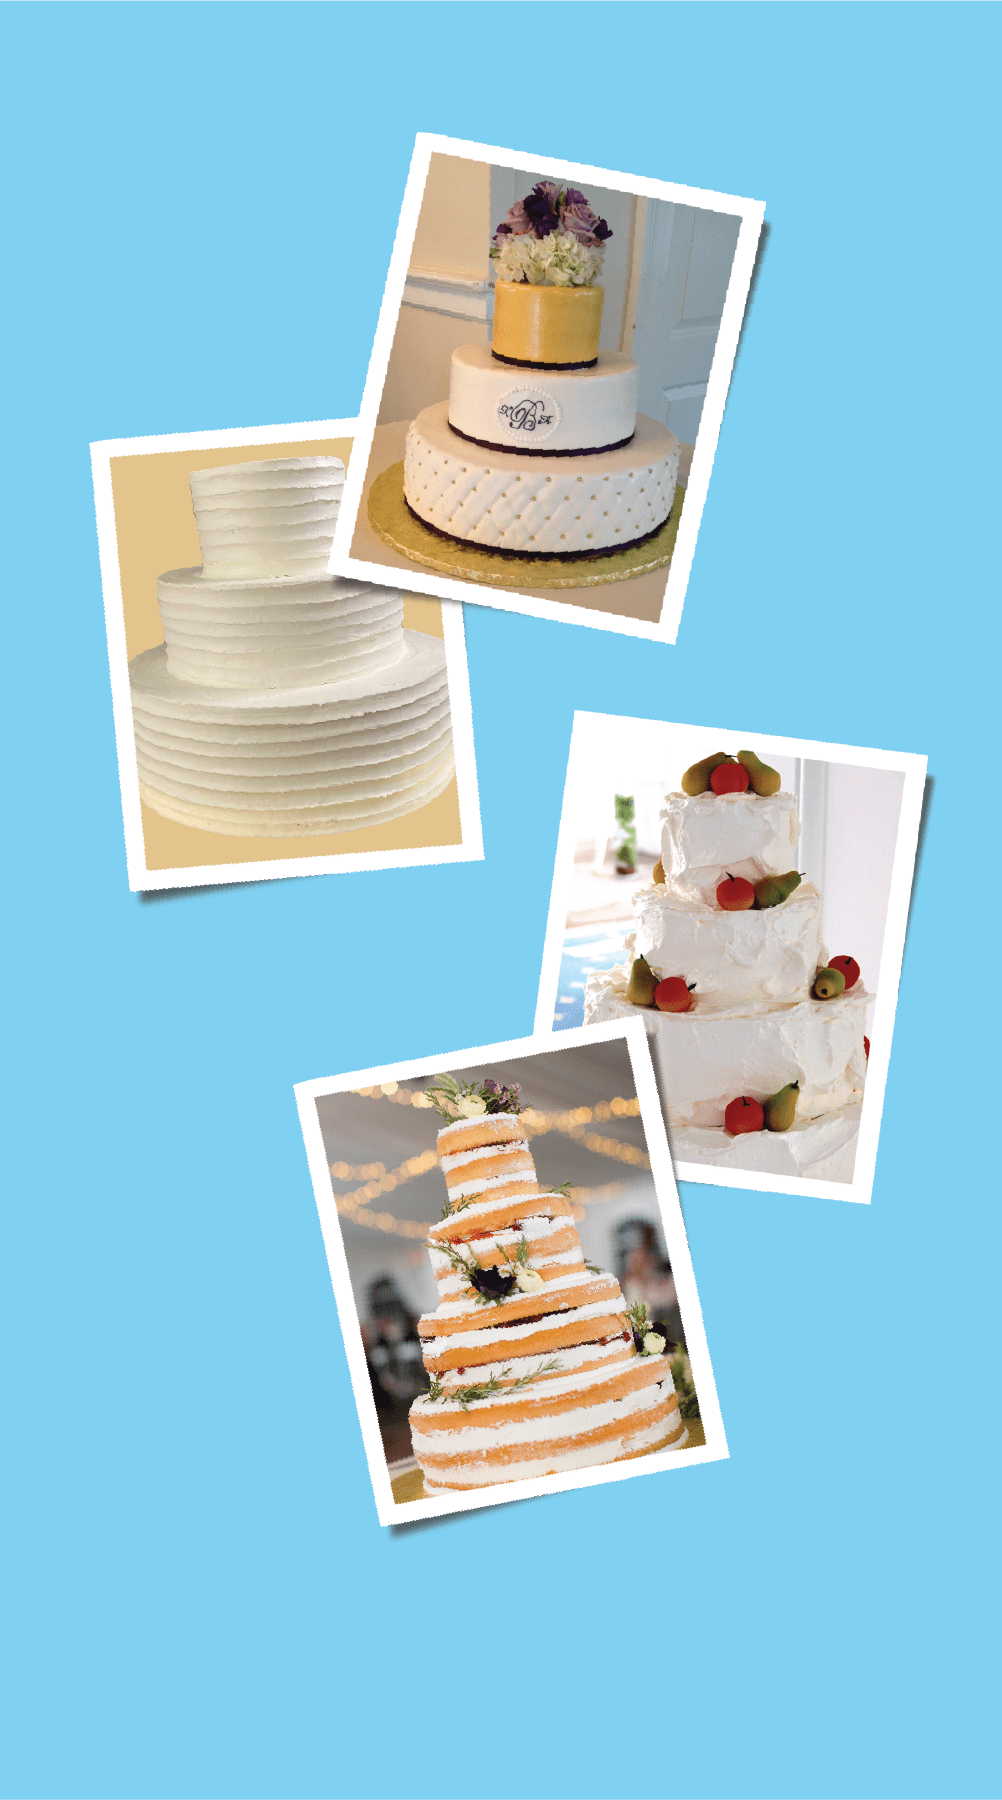 four pictures of wedding cakes